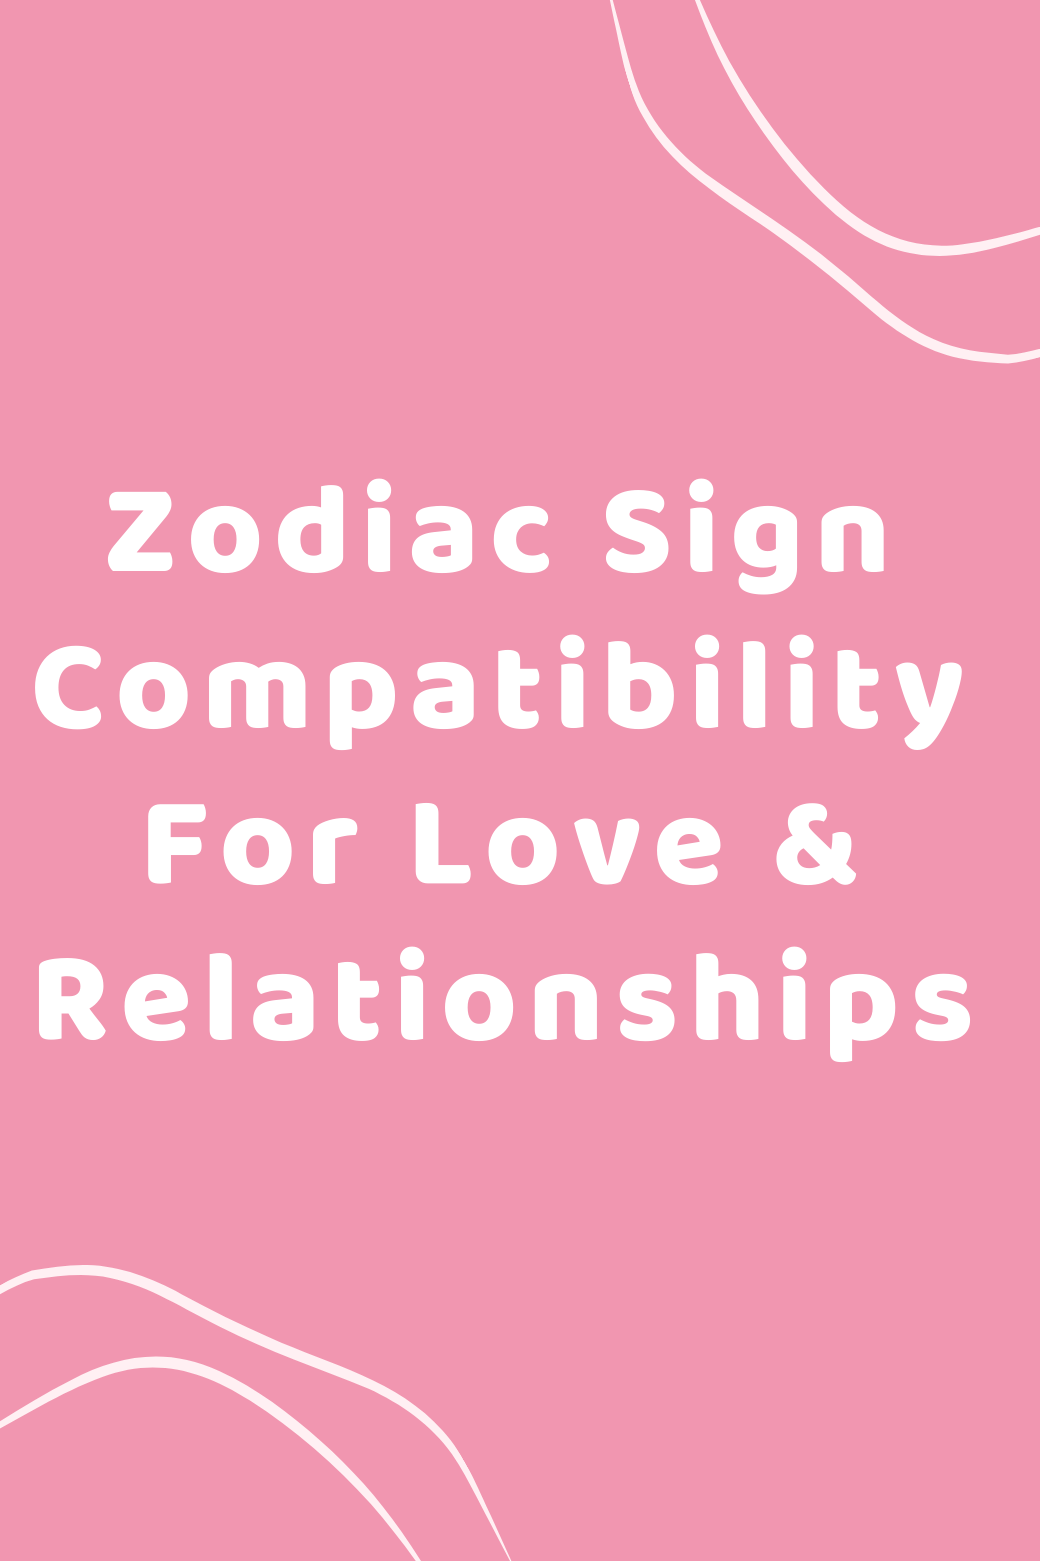 Zodiac Signs Compatibility For Love & Relationships